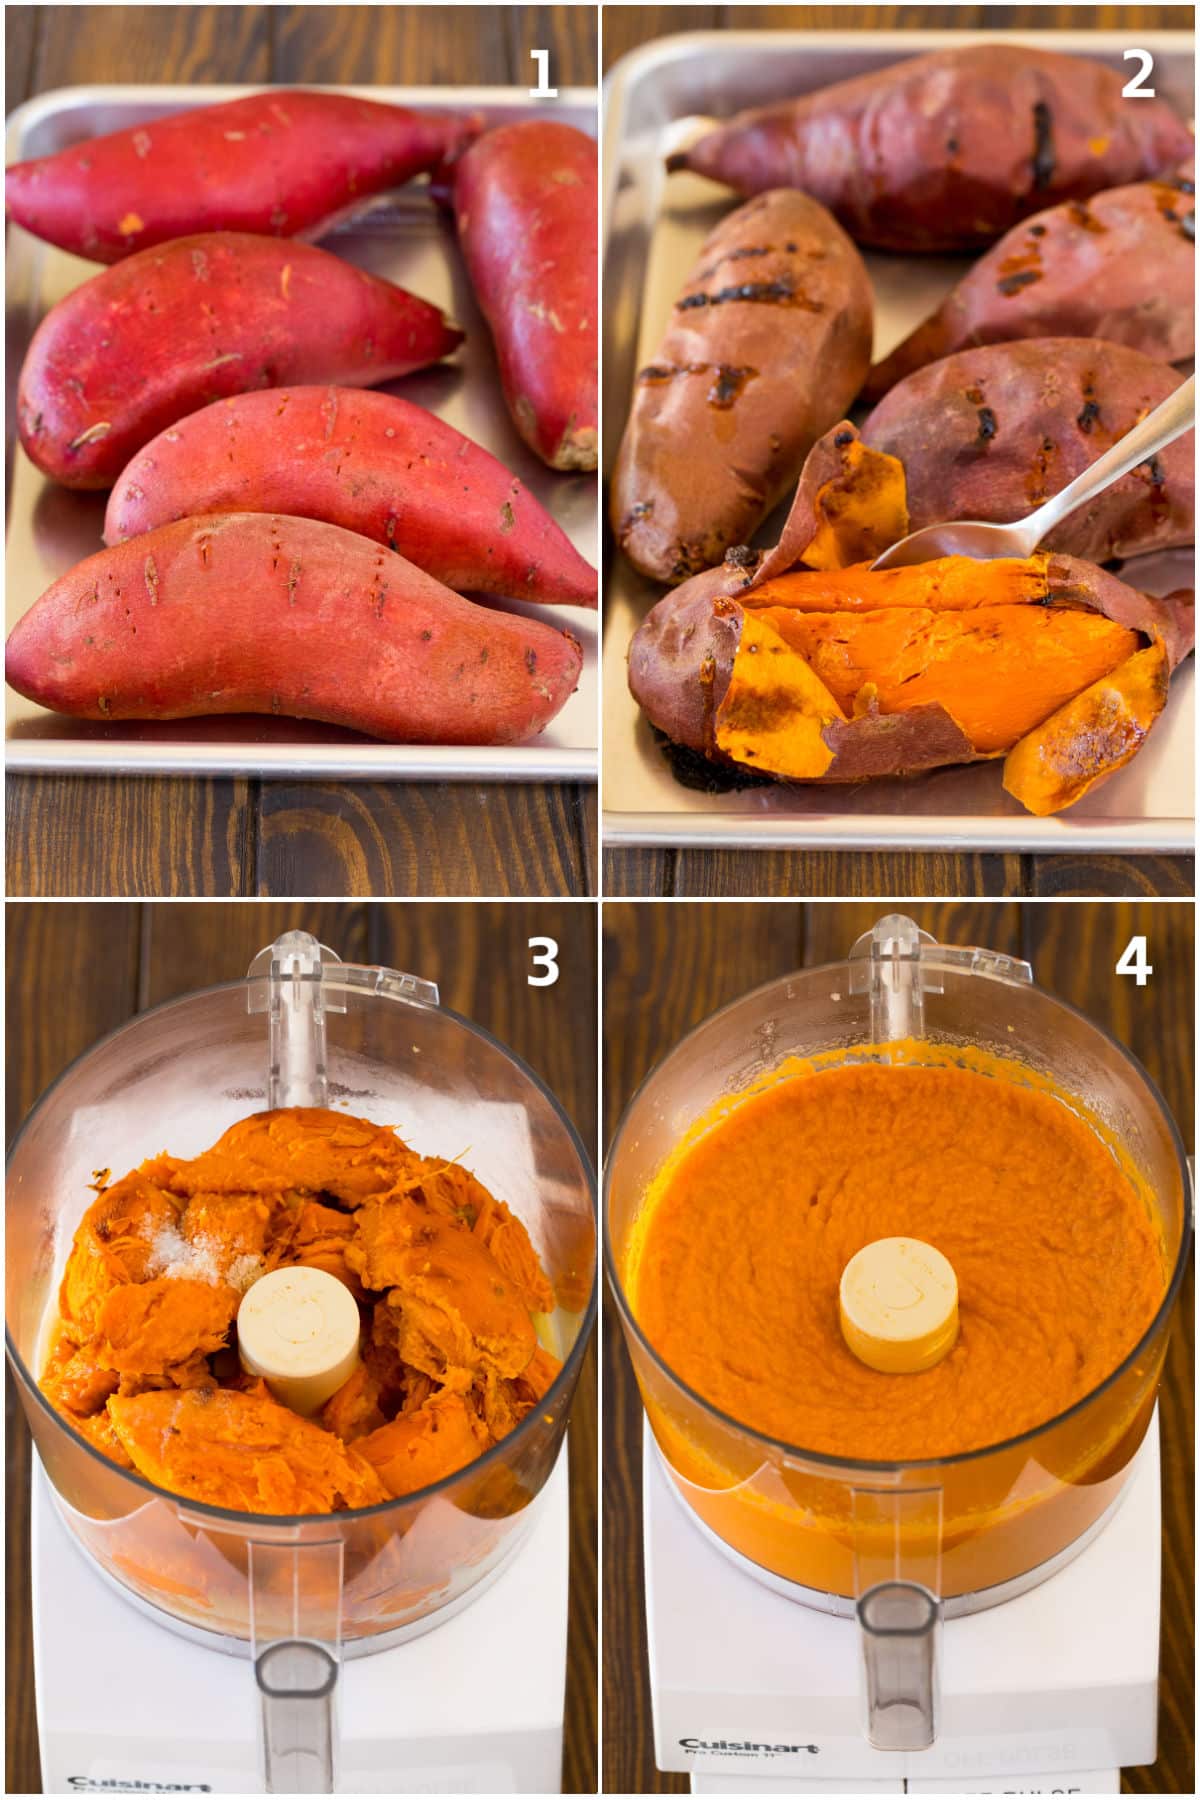 Step by step shots showing how to cook and puree sweet potatoes.